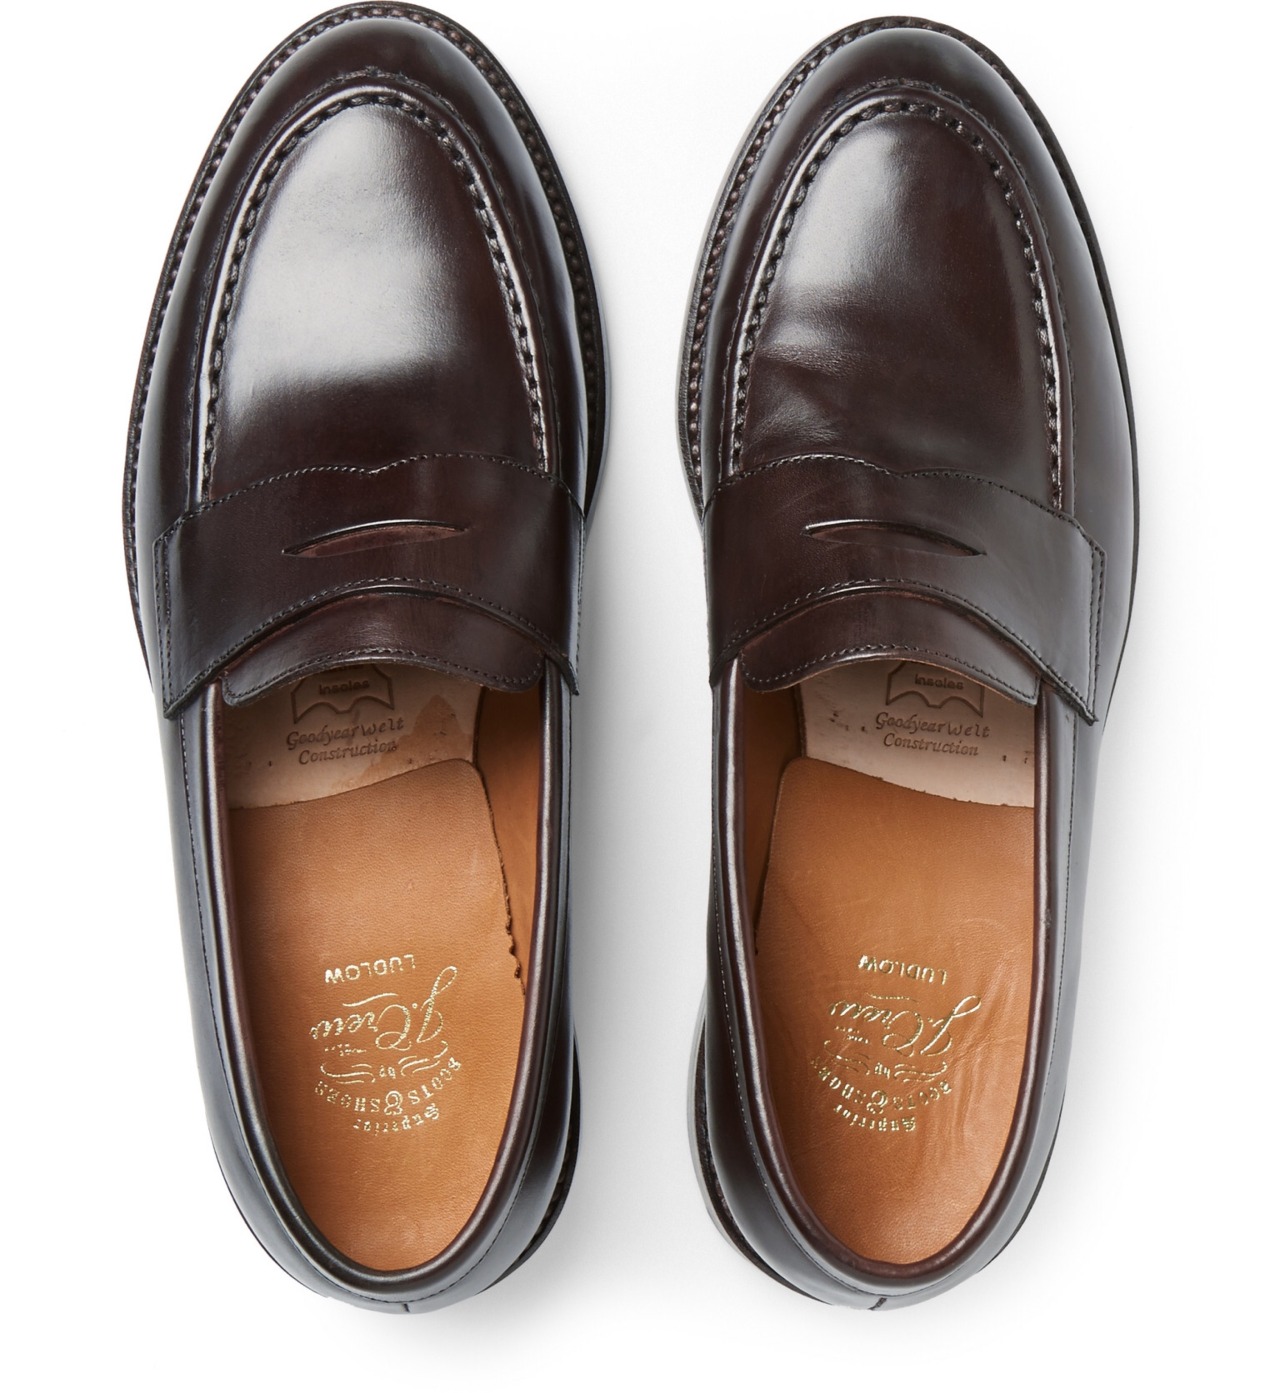 St. BolivarEmile. - The Penny Loafer My latest obsession? Penny...